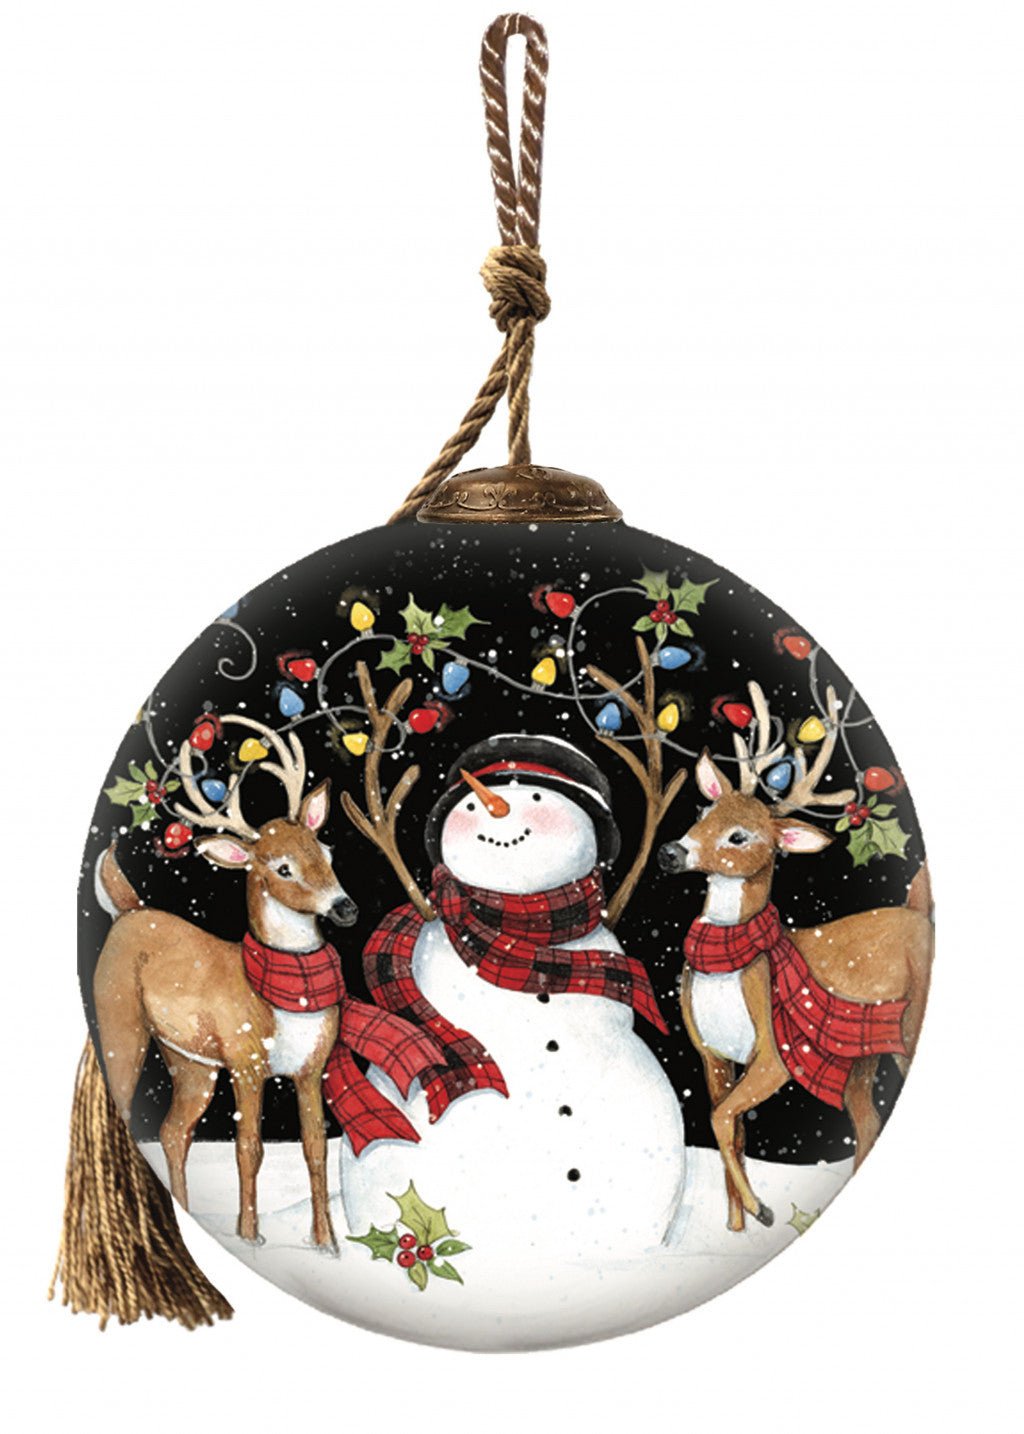 Snowman and Reindeer in Holiday Lights Hand Painted Mouth Blown Glass Ornament - Tuesday Morning-Christmas Ornaments